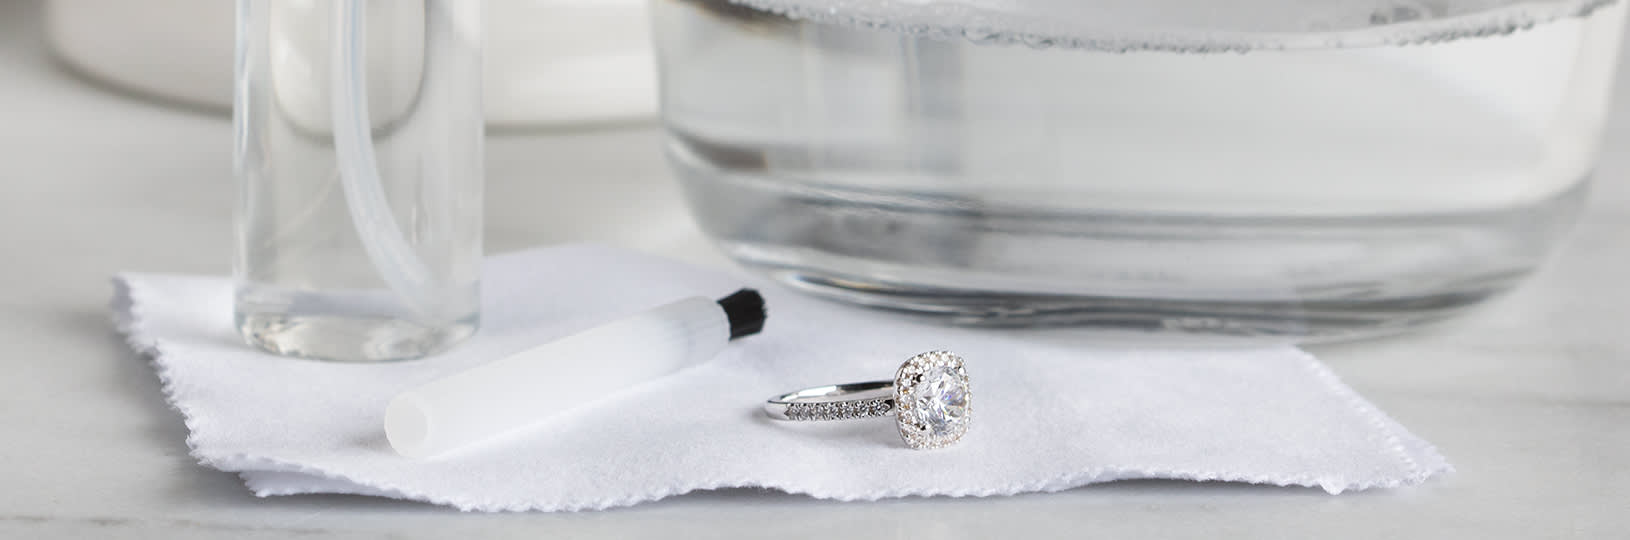 It's important to properly care for your engagement ring and fine jewelry